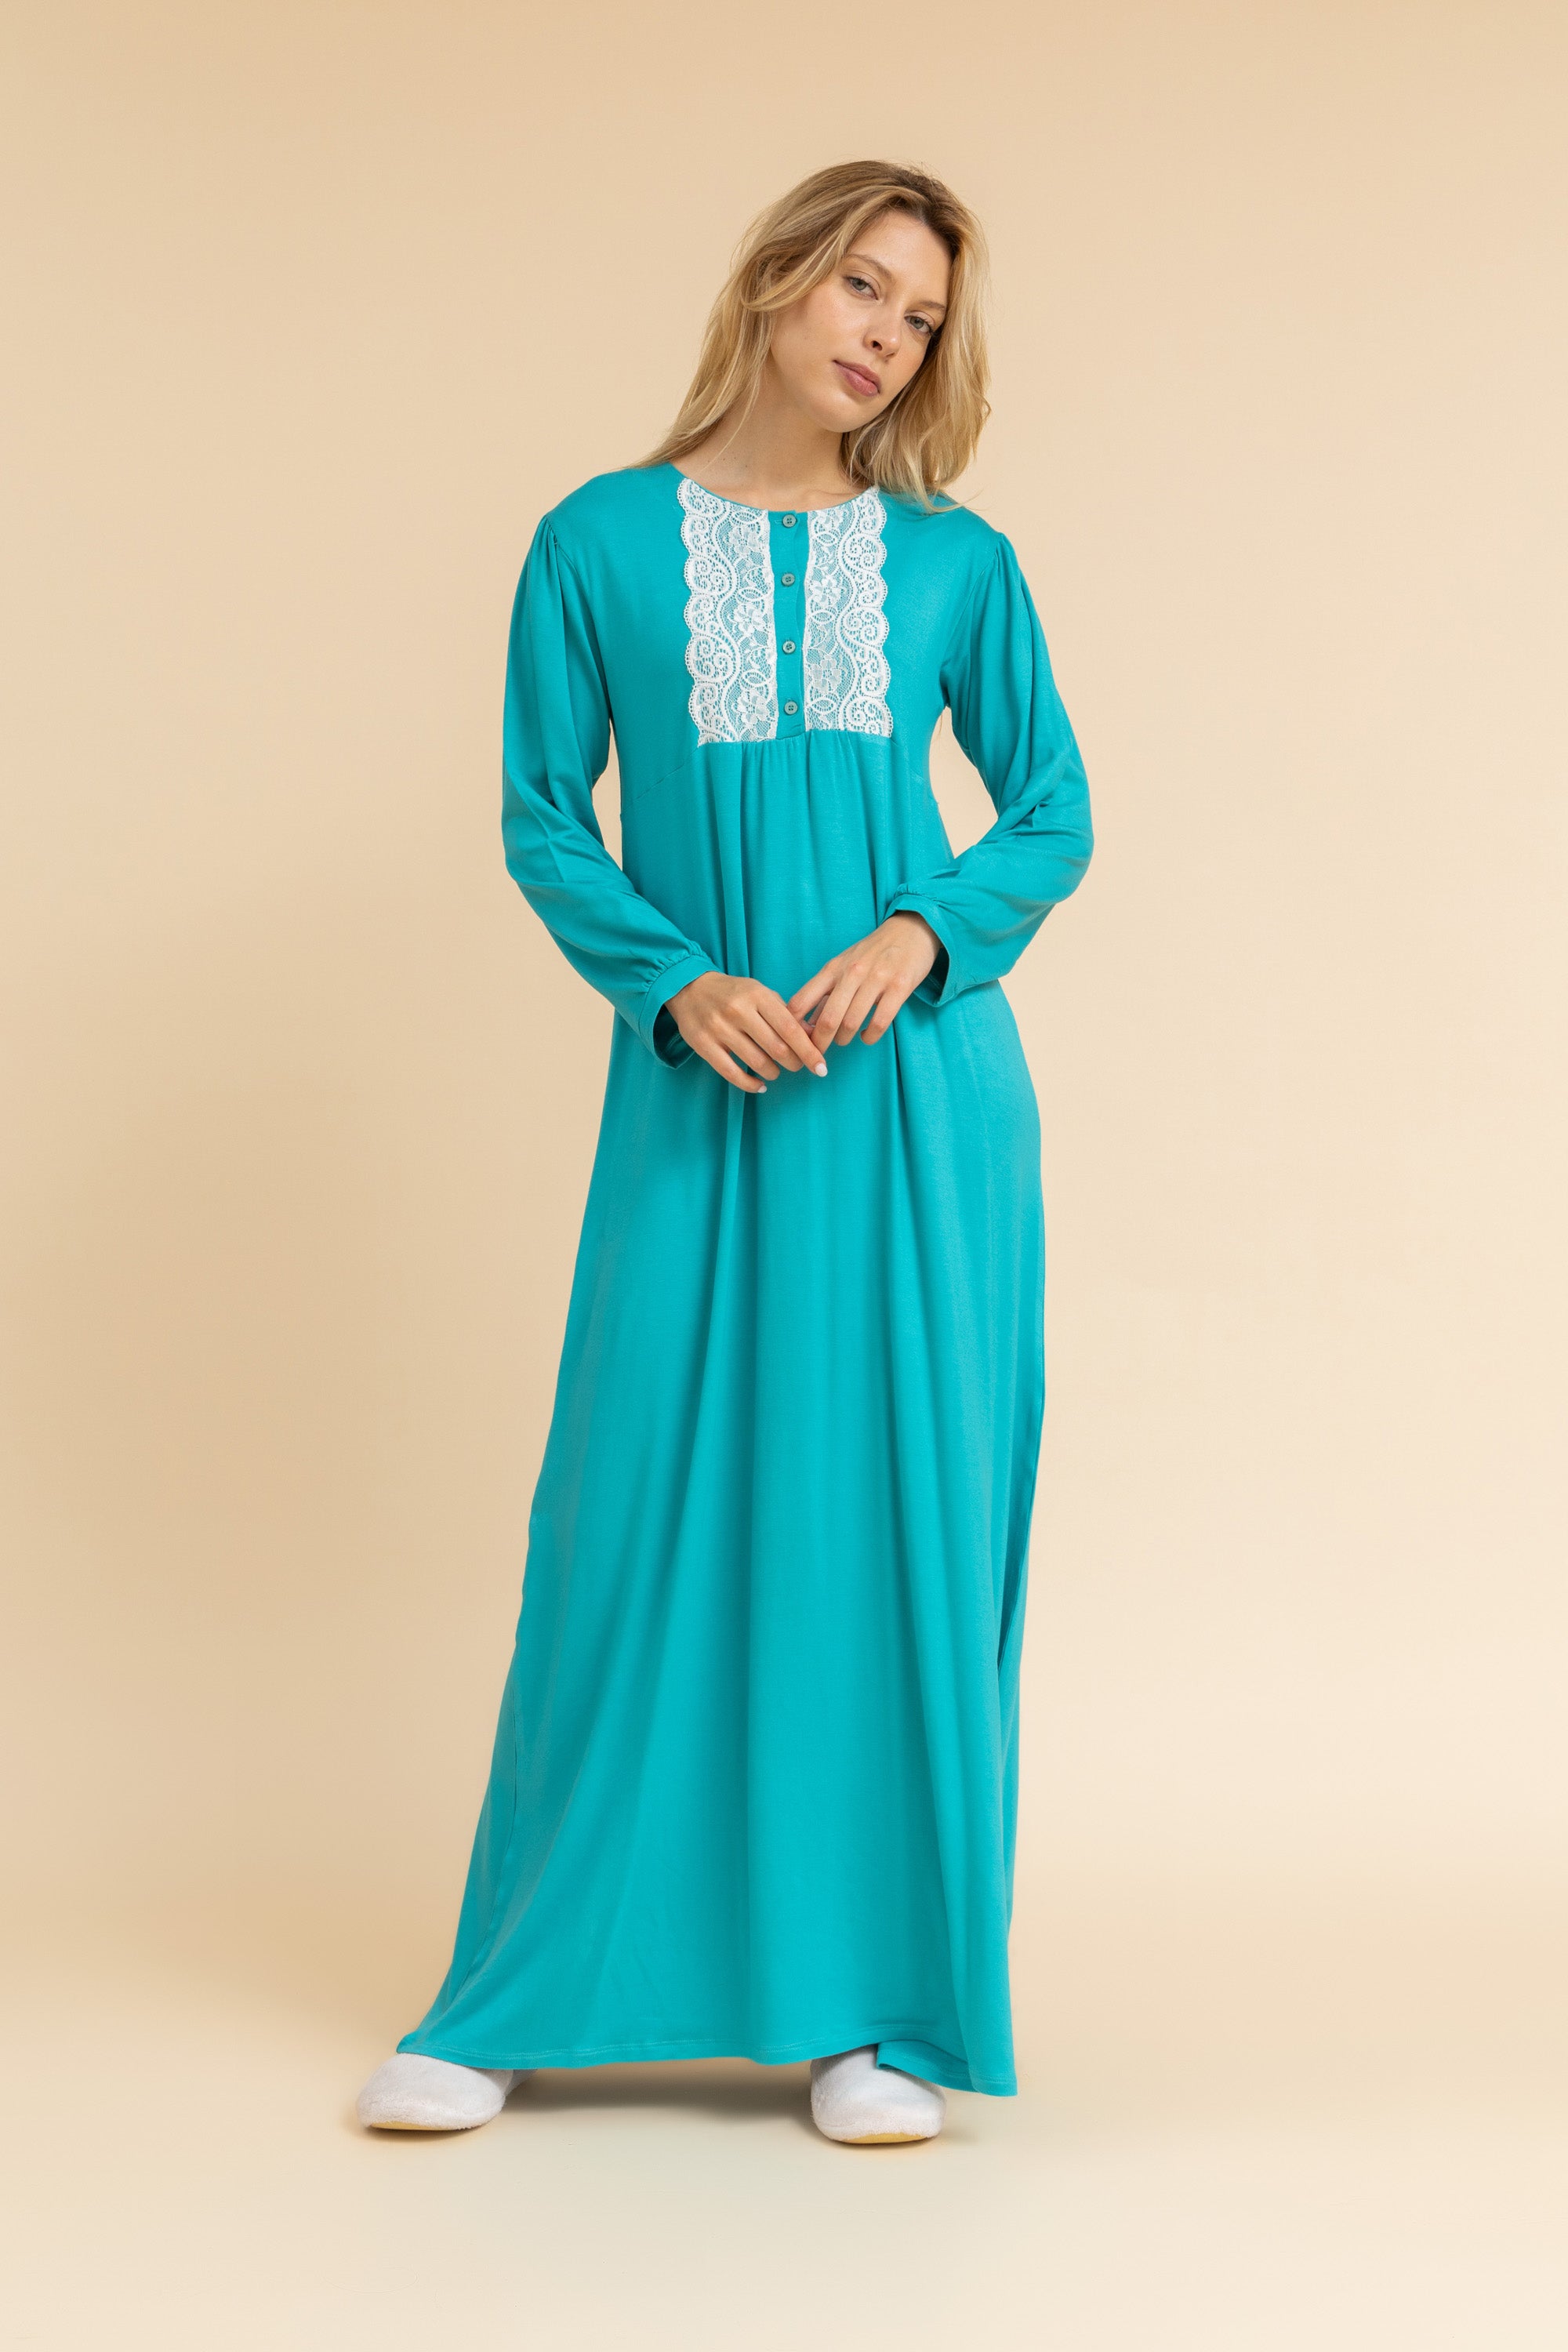 Beautiful nightgown with loose sleeves and lace trim